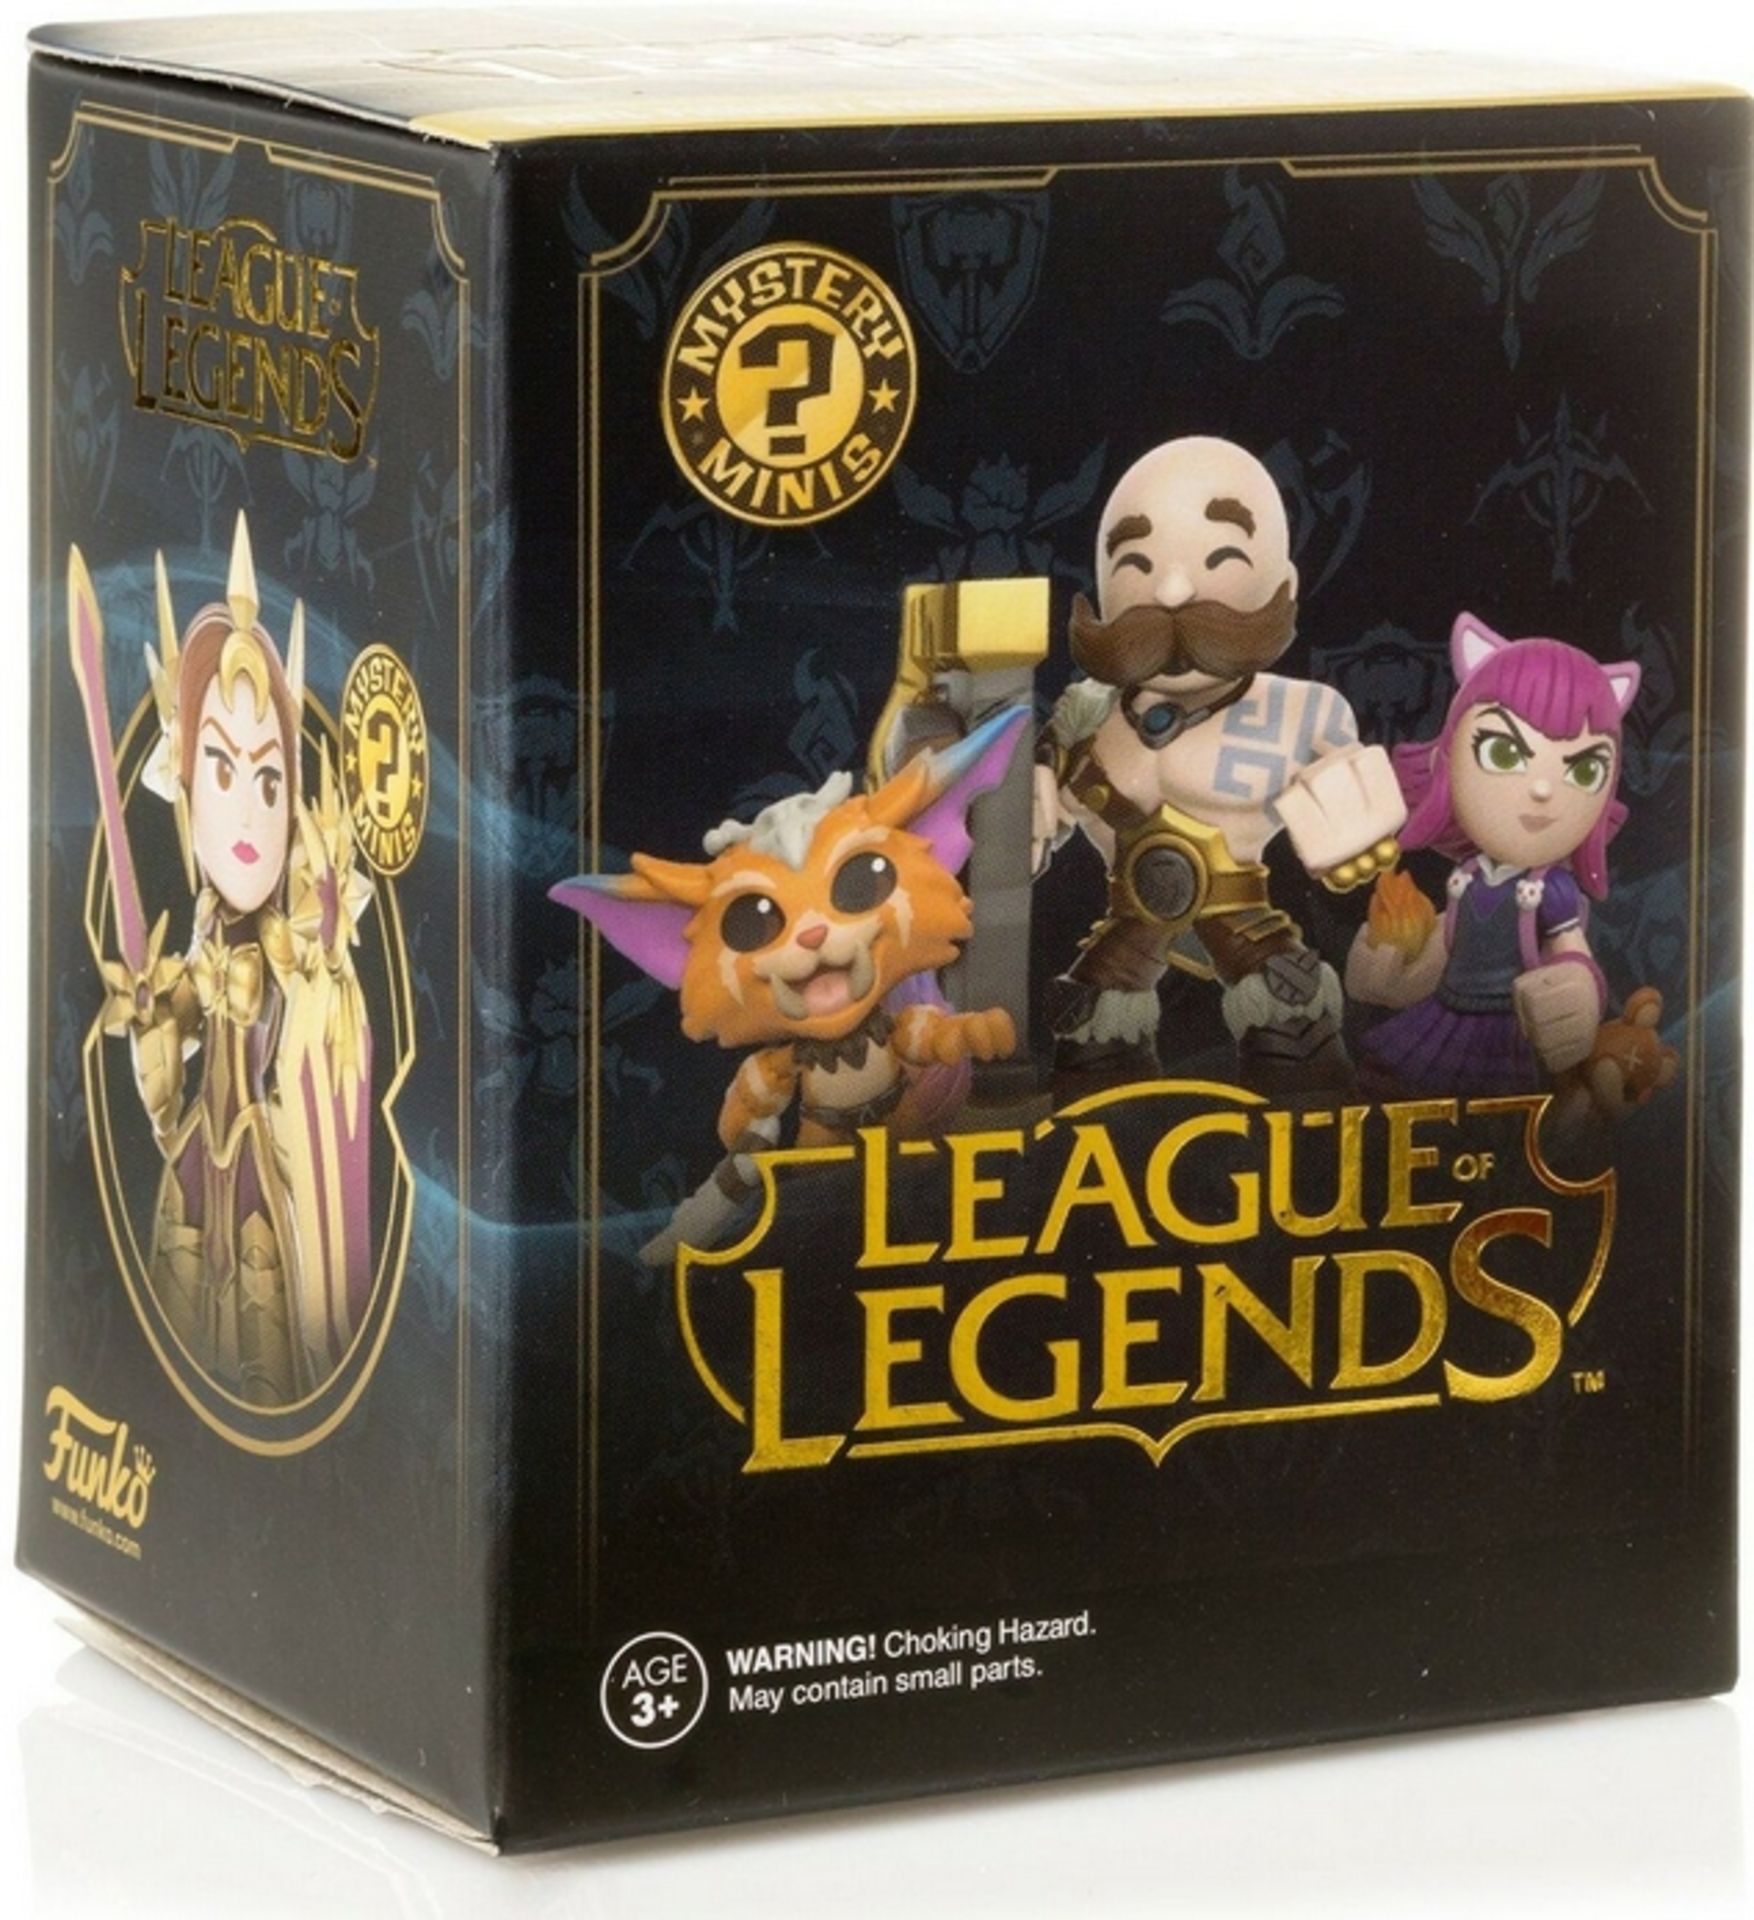 A Box Of 12 Brand New Funko League Of Friends Figures.